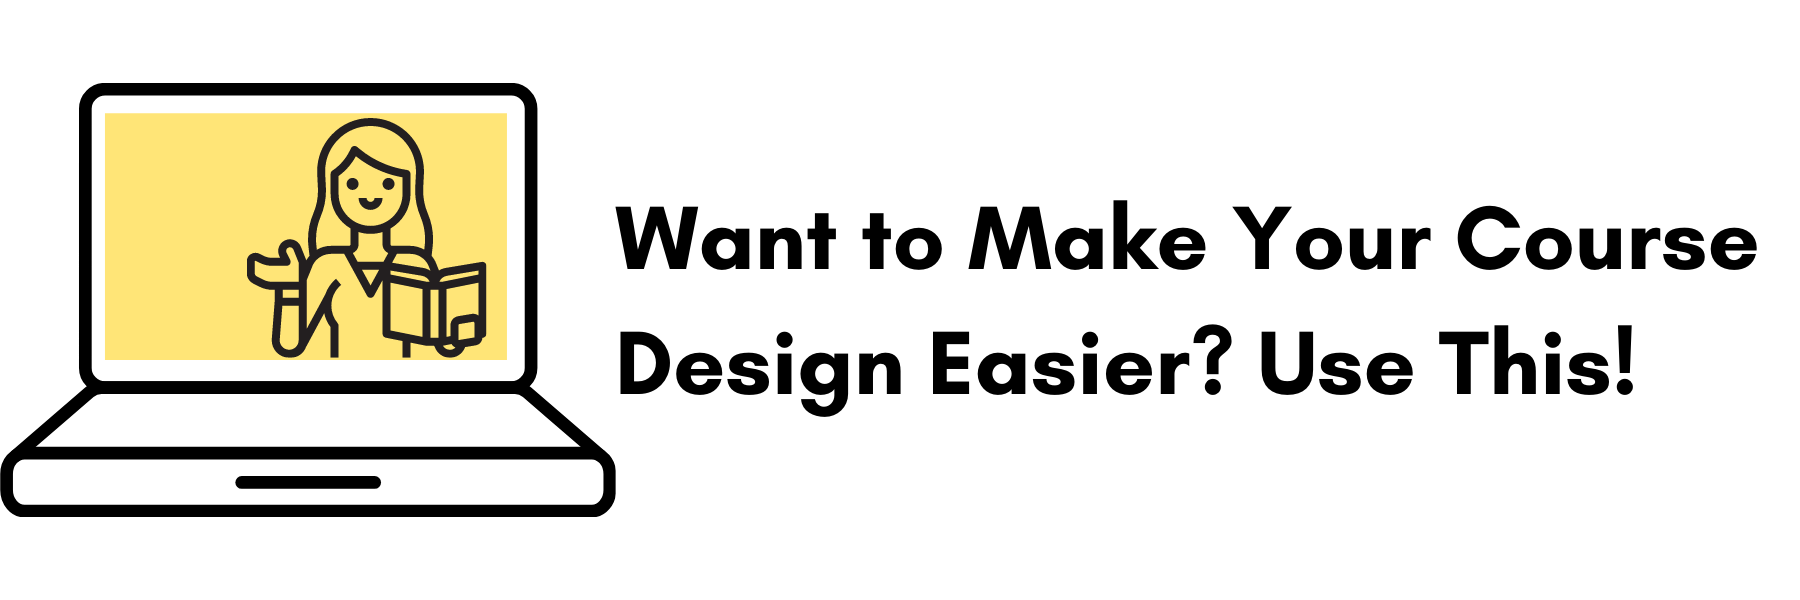 Want to Make Your Course Design Easier? Use This!